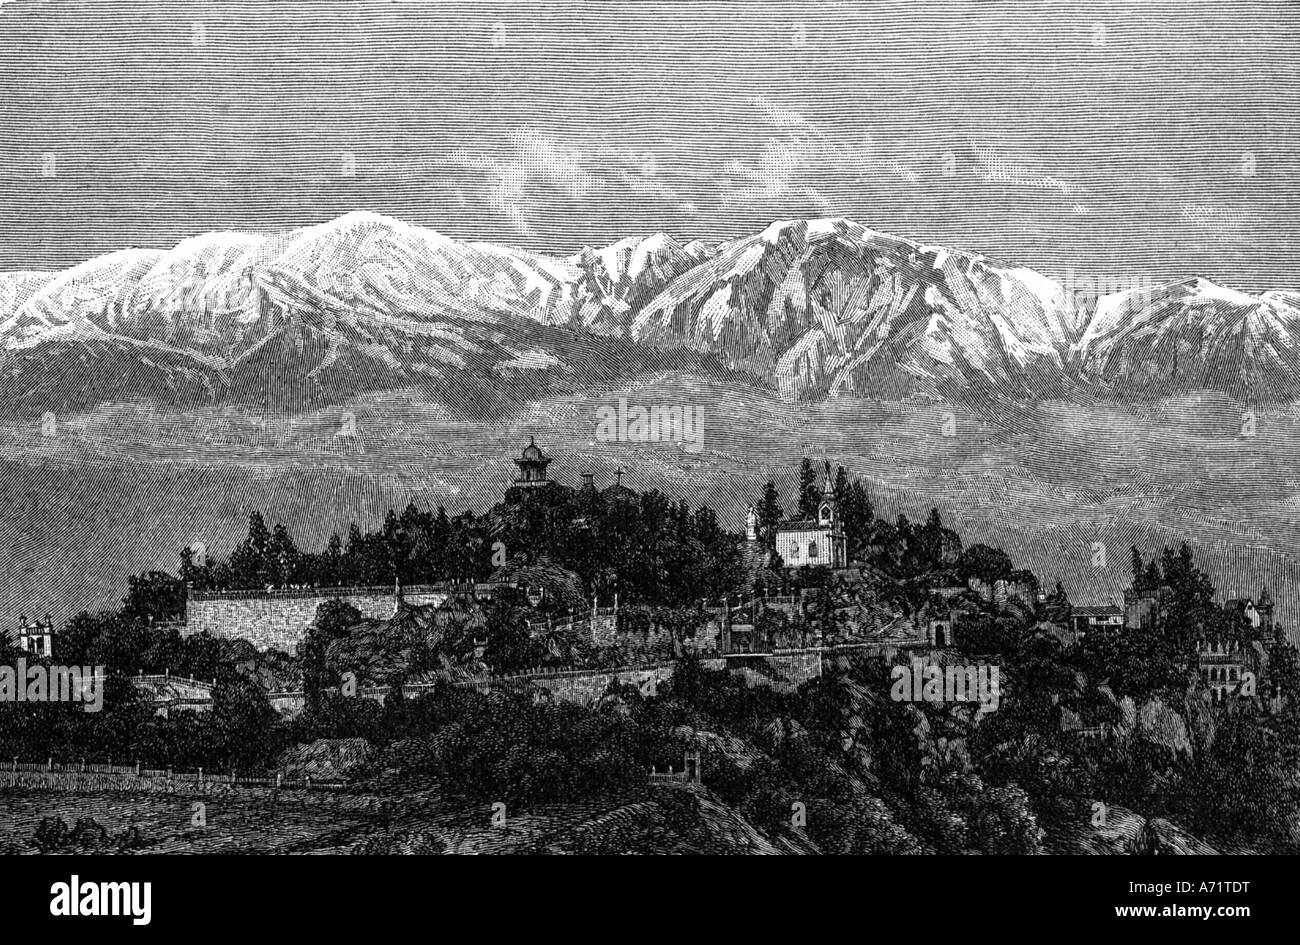 geography / travel, Chile, Santiago, illustration after photography, 19th century, historic, historical, South America, Cordillere, snowcovered mountains, Stock Photo